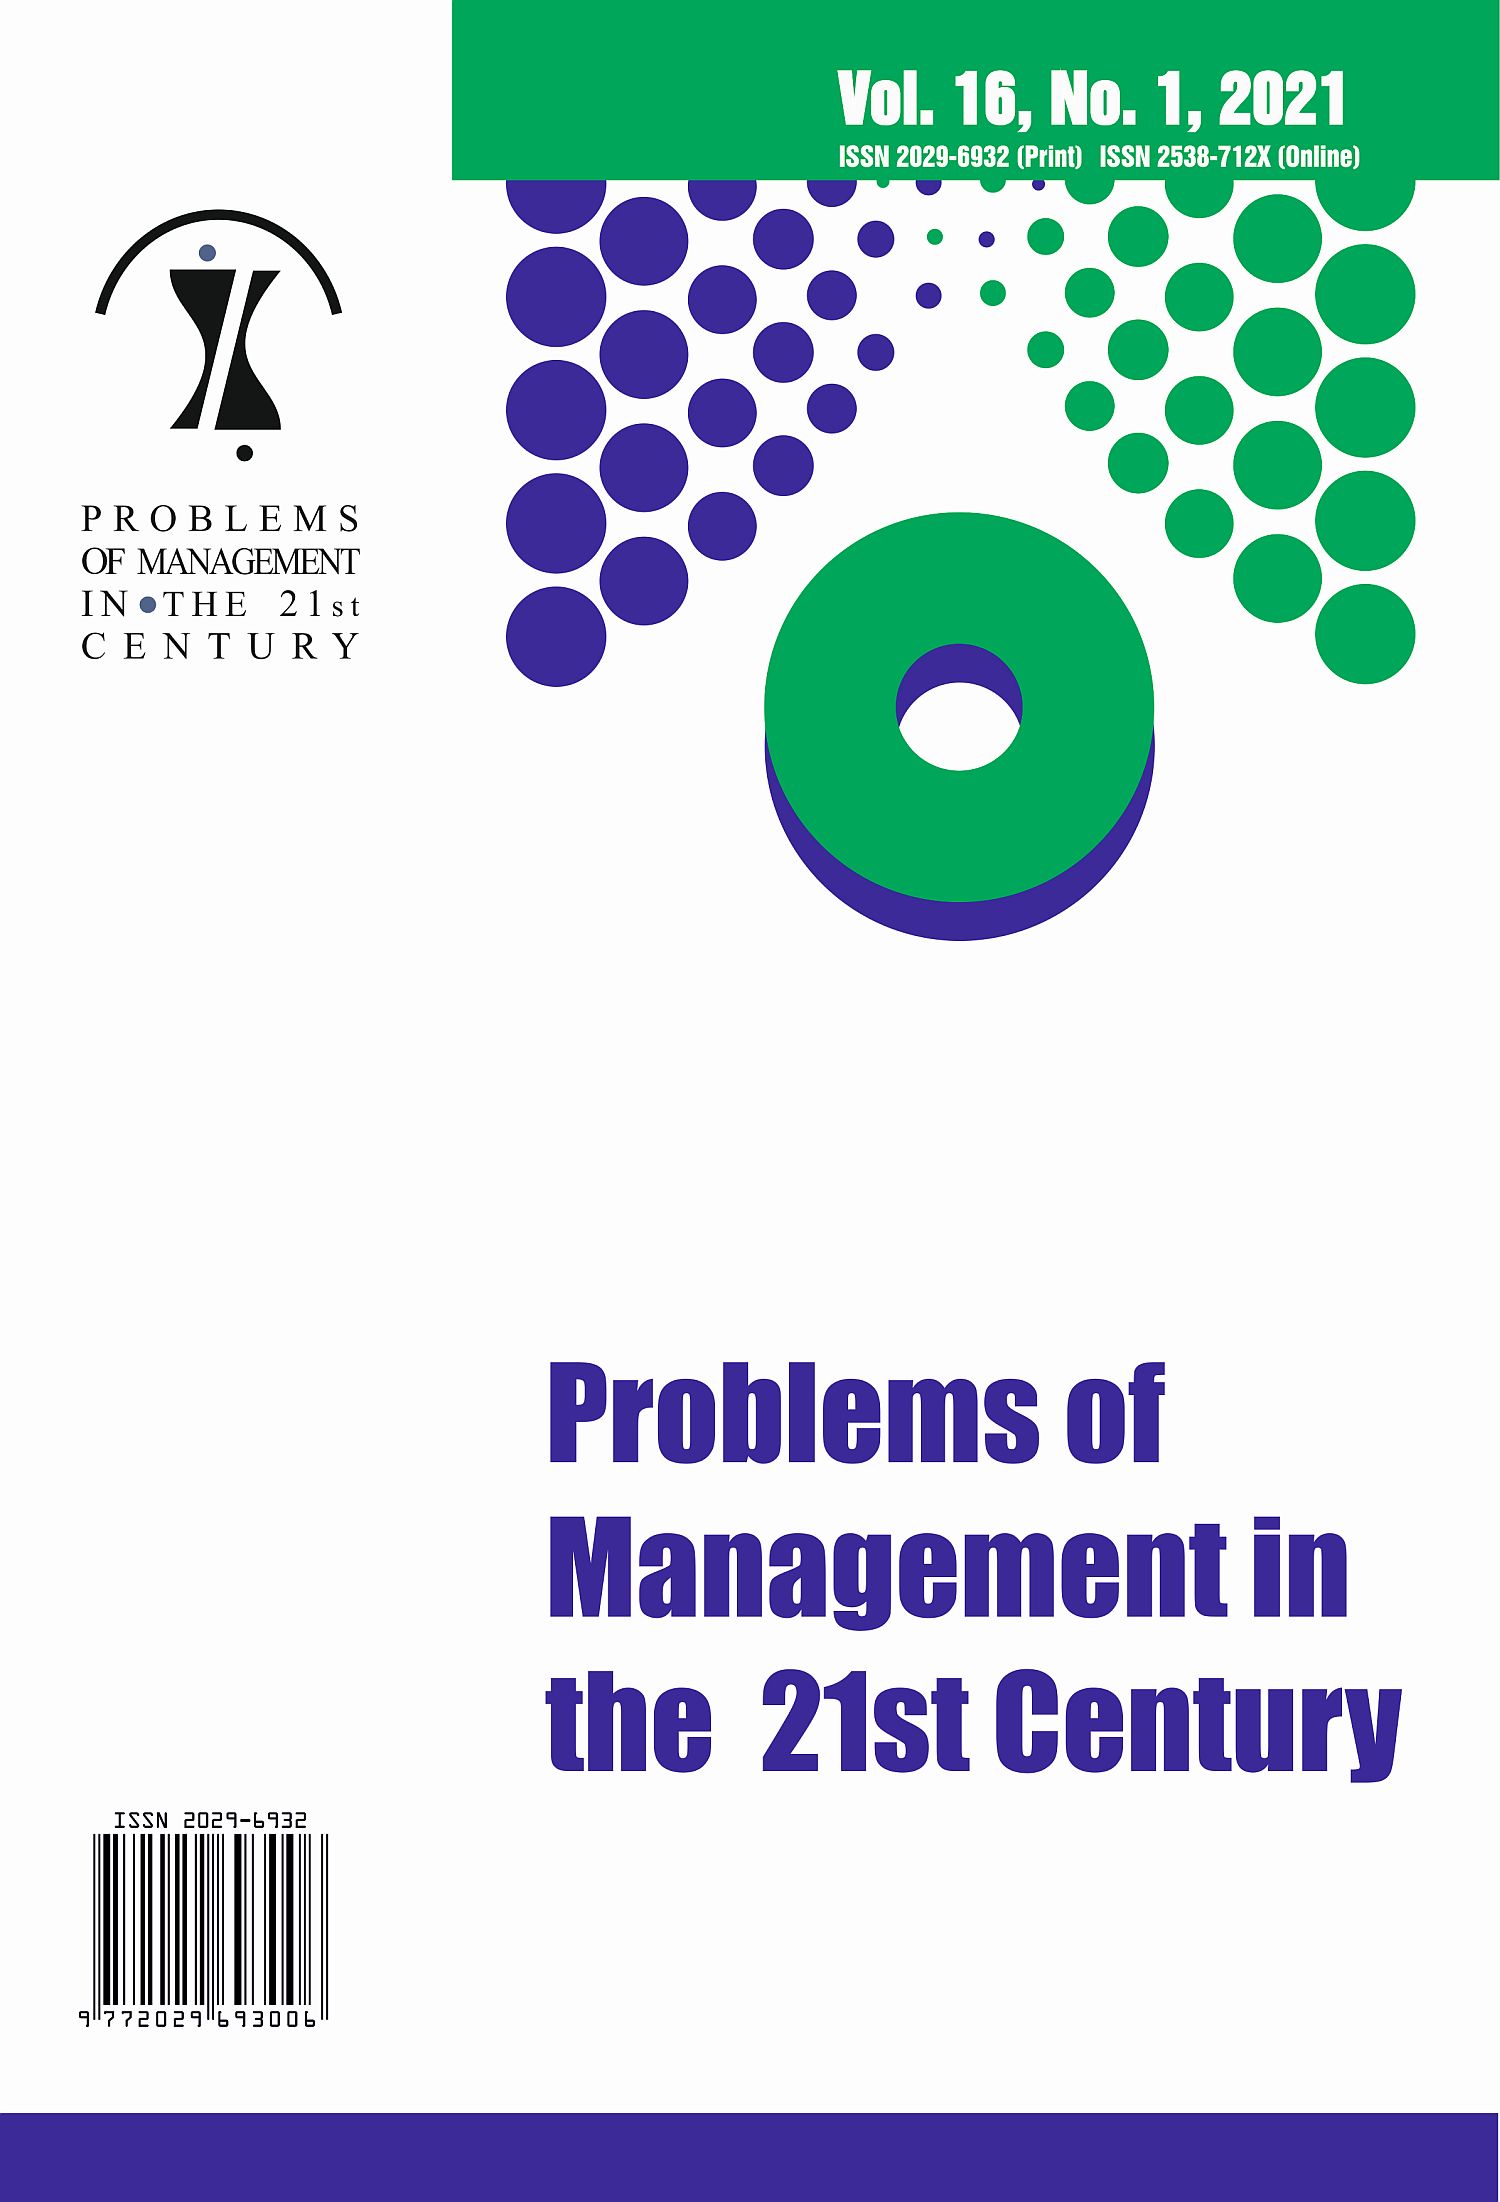 THE POLITICAL-ECONOMY MANAGEMENT: INDONESIA'S NEEDS FOR THE COVID-19 PANDEMIC Cover Image